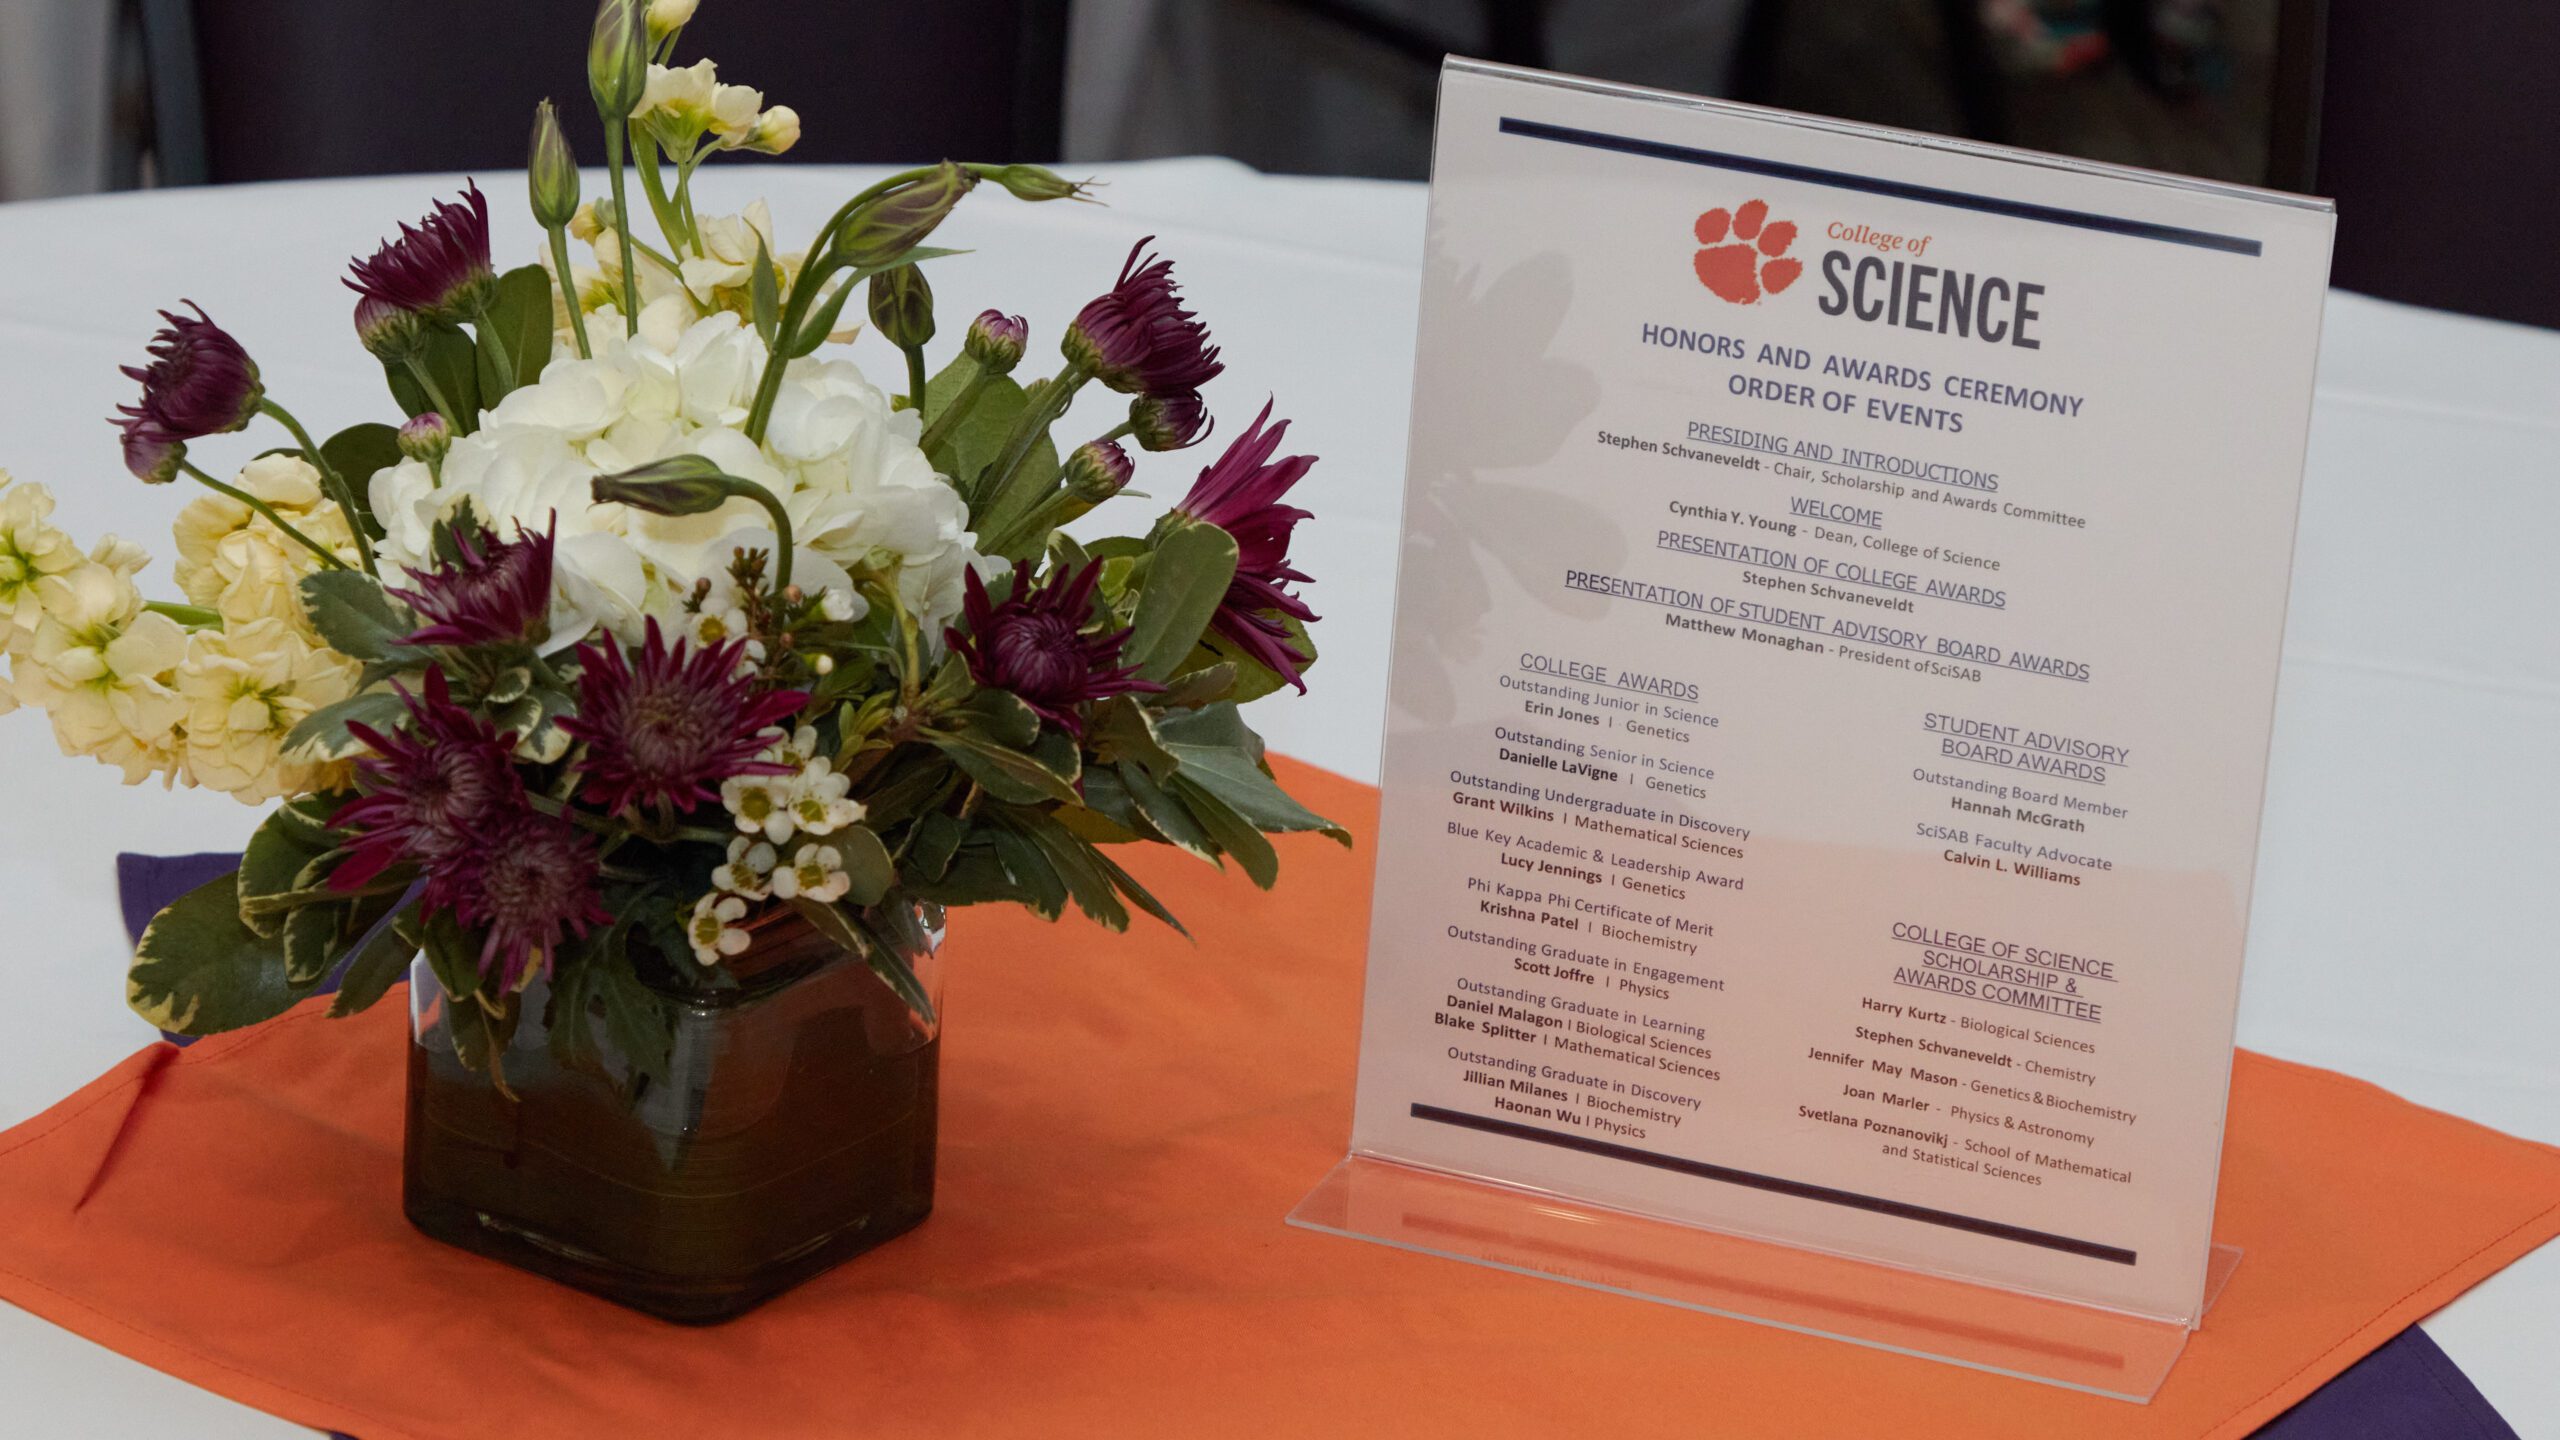 A photograph of a white flower table setting with a piece of paper in an acrylic holder showing the order of the program at the College of Science's student Honors and Awards ceremony.